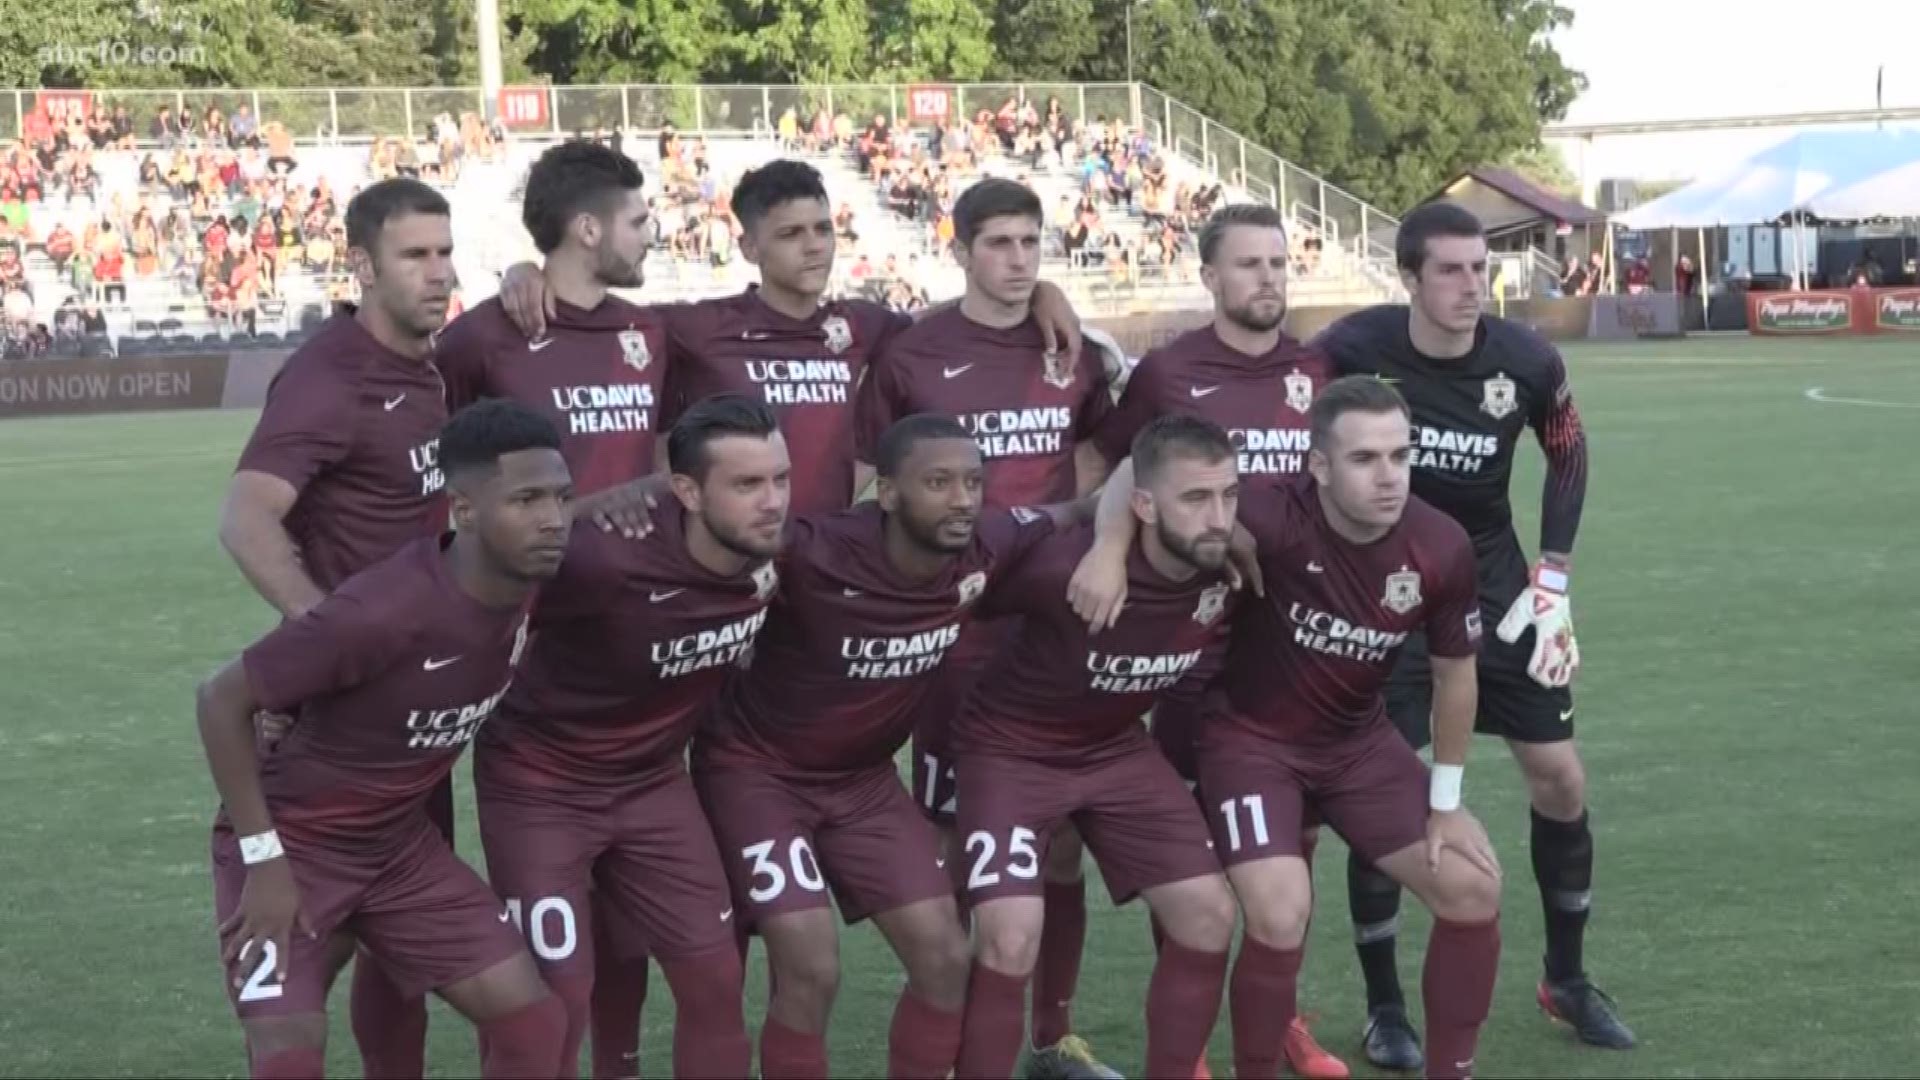 Major League Soccer made a big announcement about their expansion Tuesday morning, but unfortunately, it was not good news for Sacramento Republic FC fans.